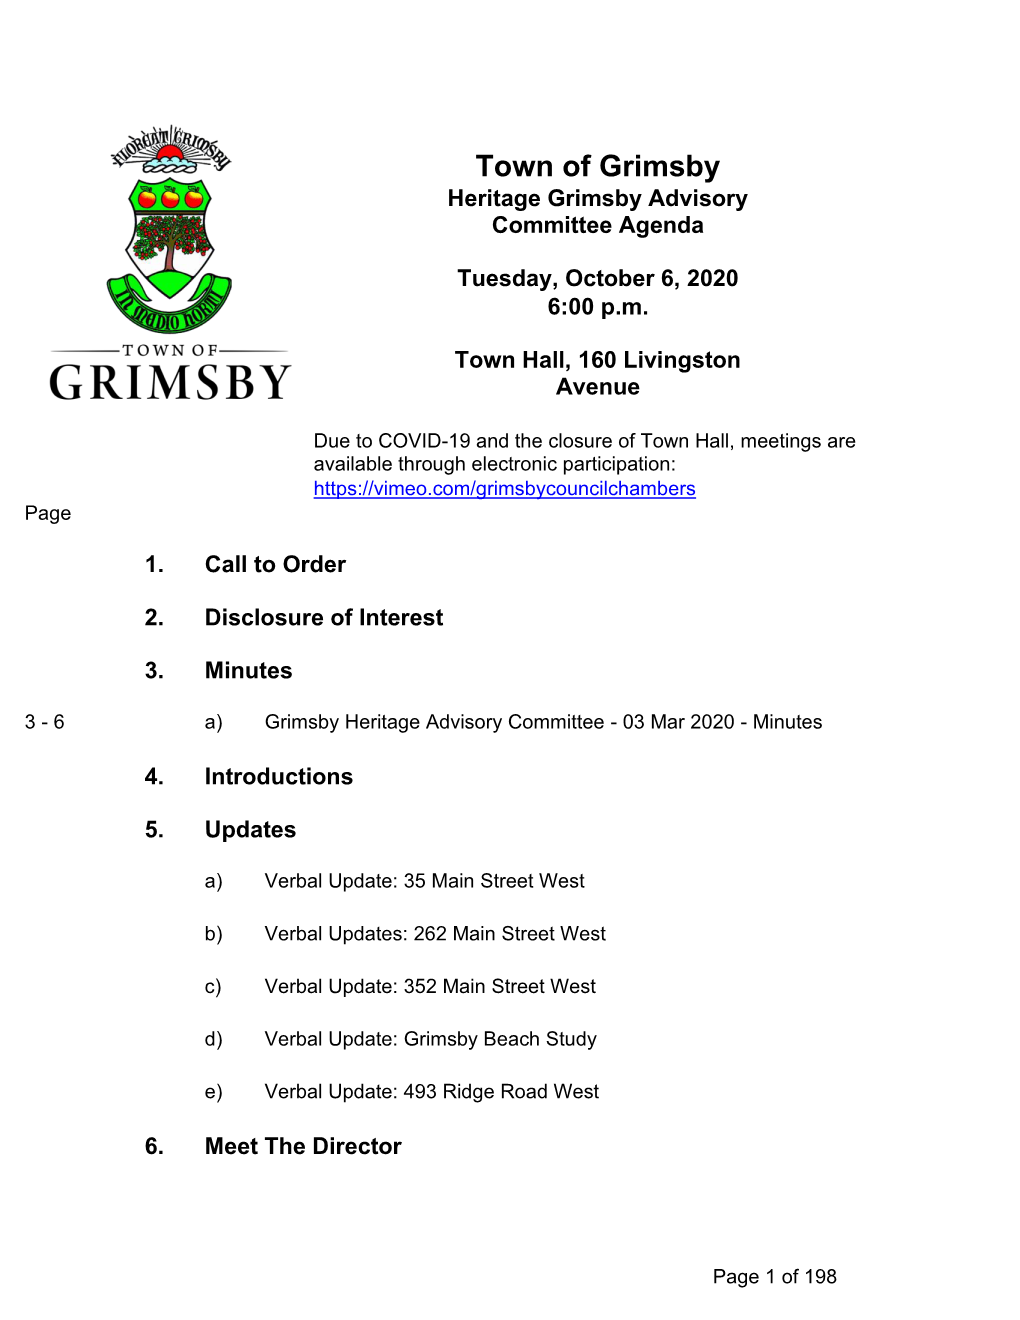 Grimsby Heritage Advisory Committee - 03 Mar 2020 - Minutes